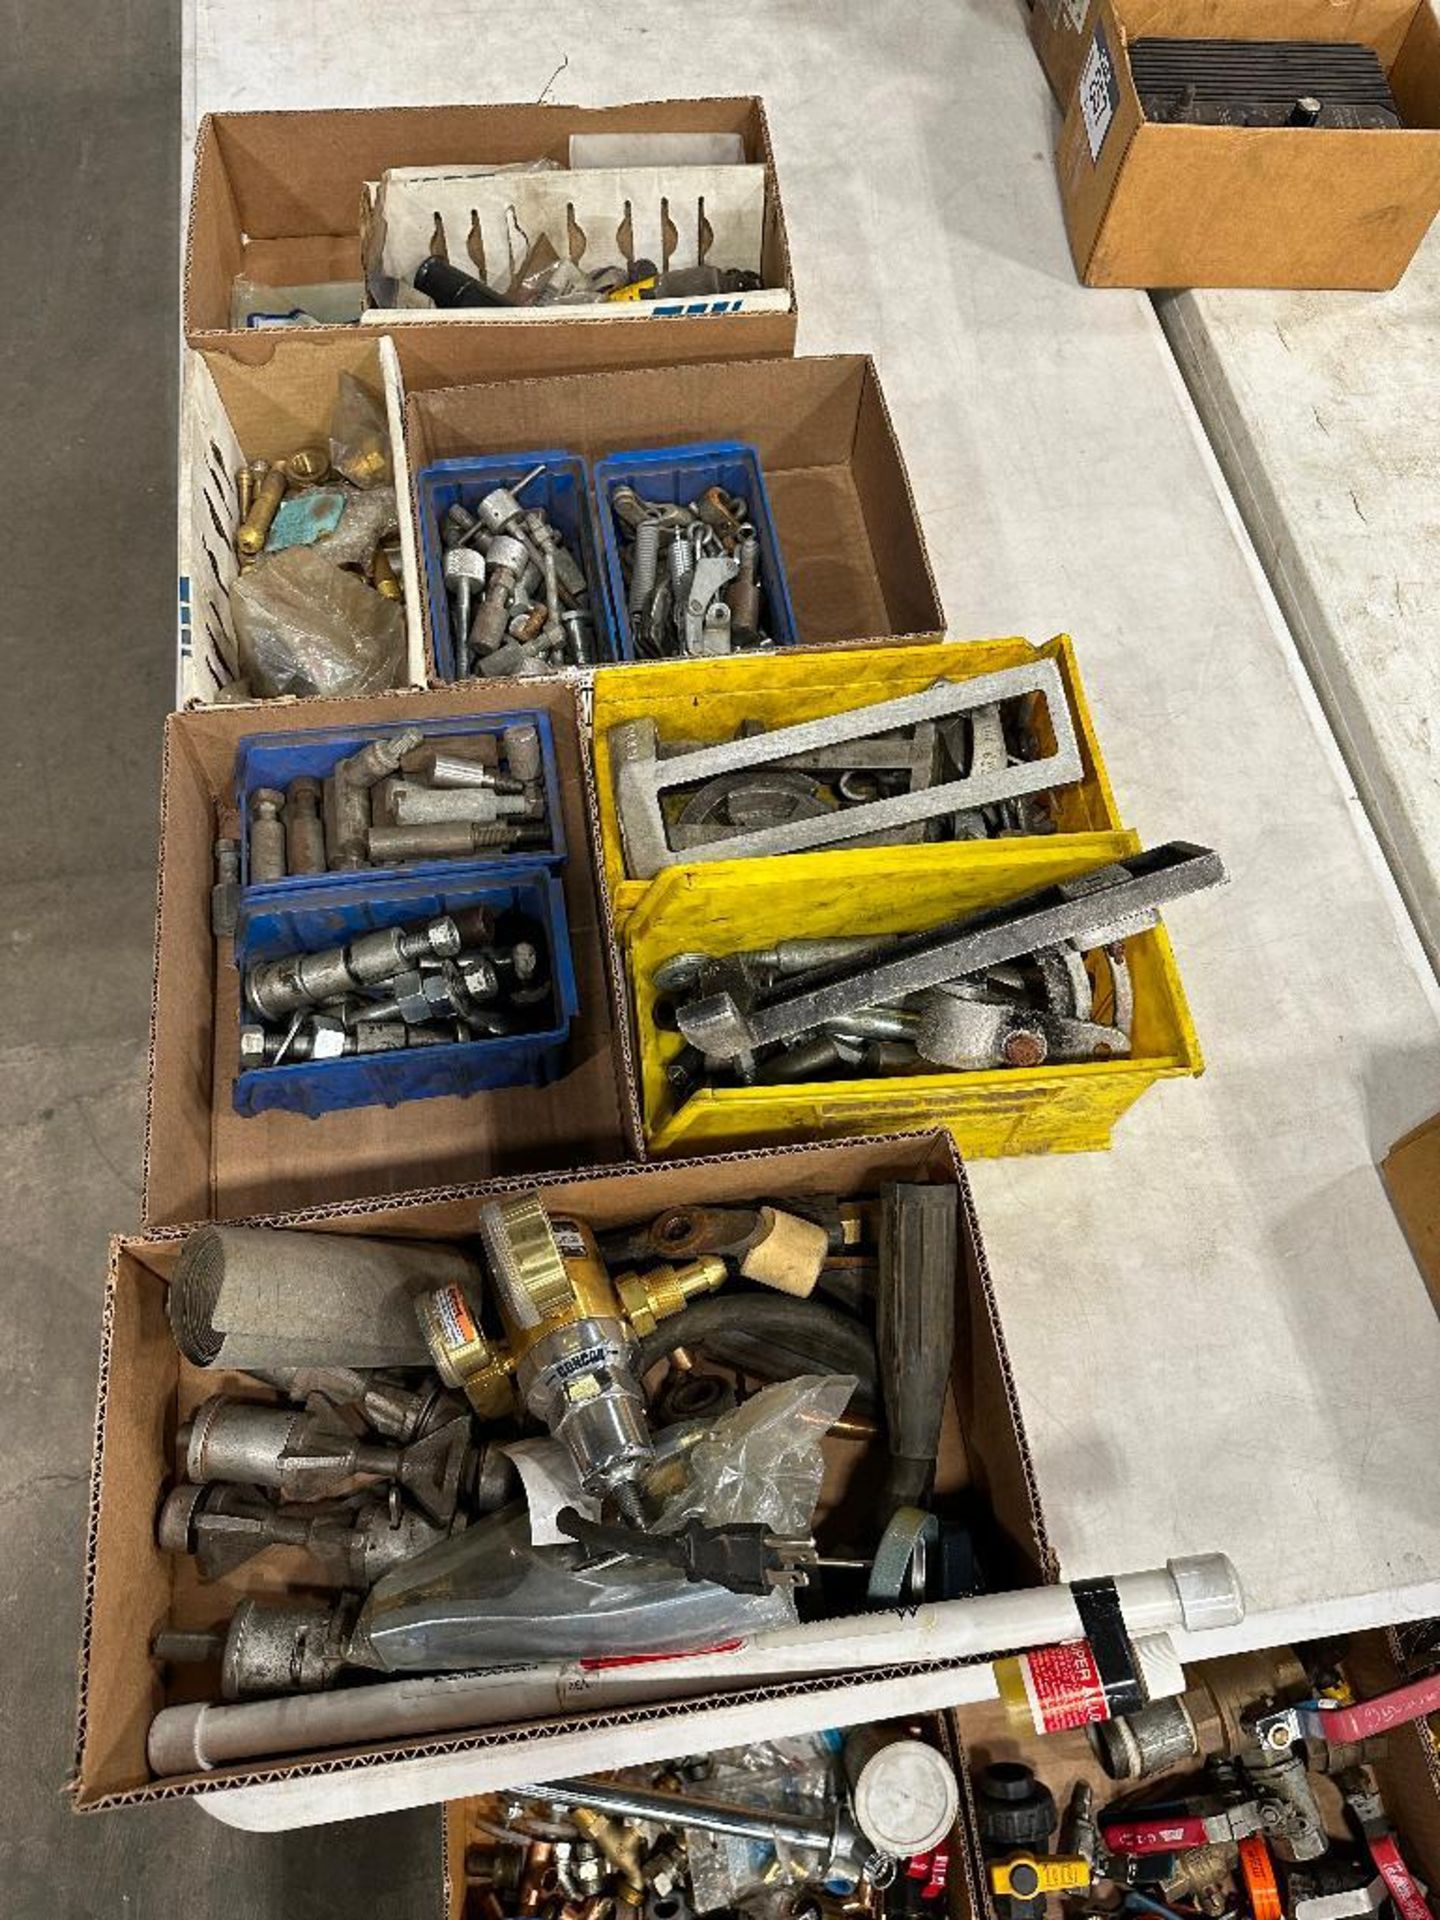 Lot of Asst. Parts, including Brass, Springs, Bolts, etc. - Image 3 of 5